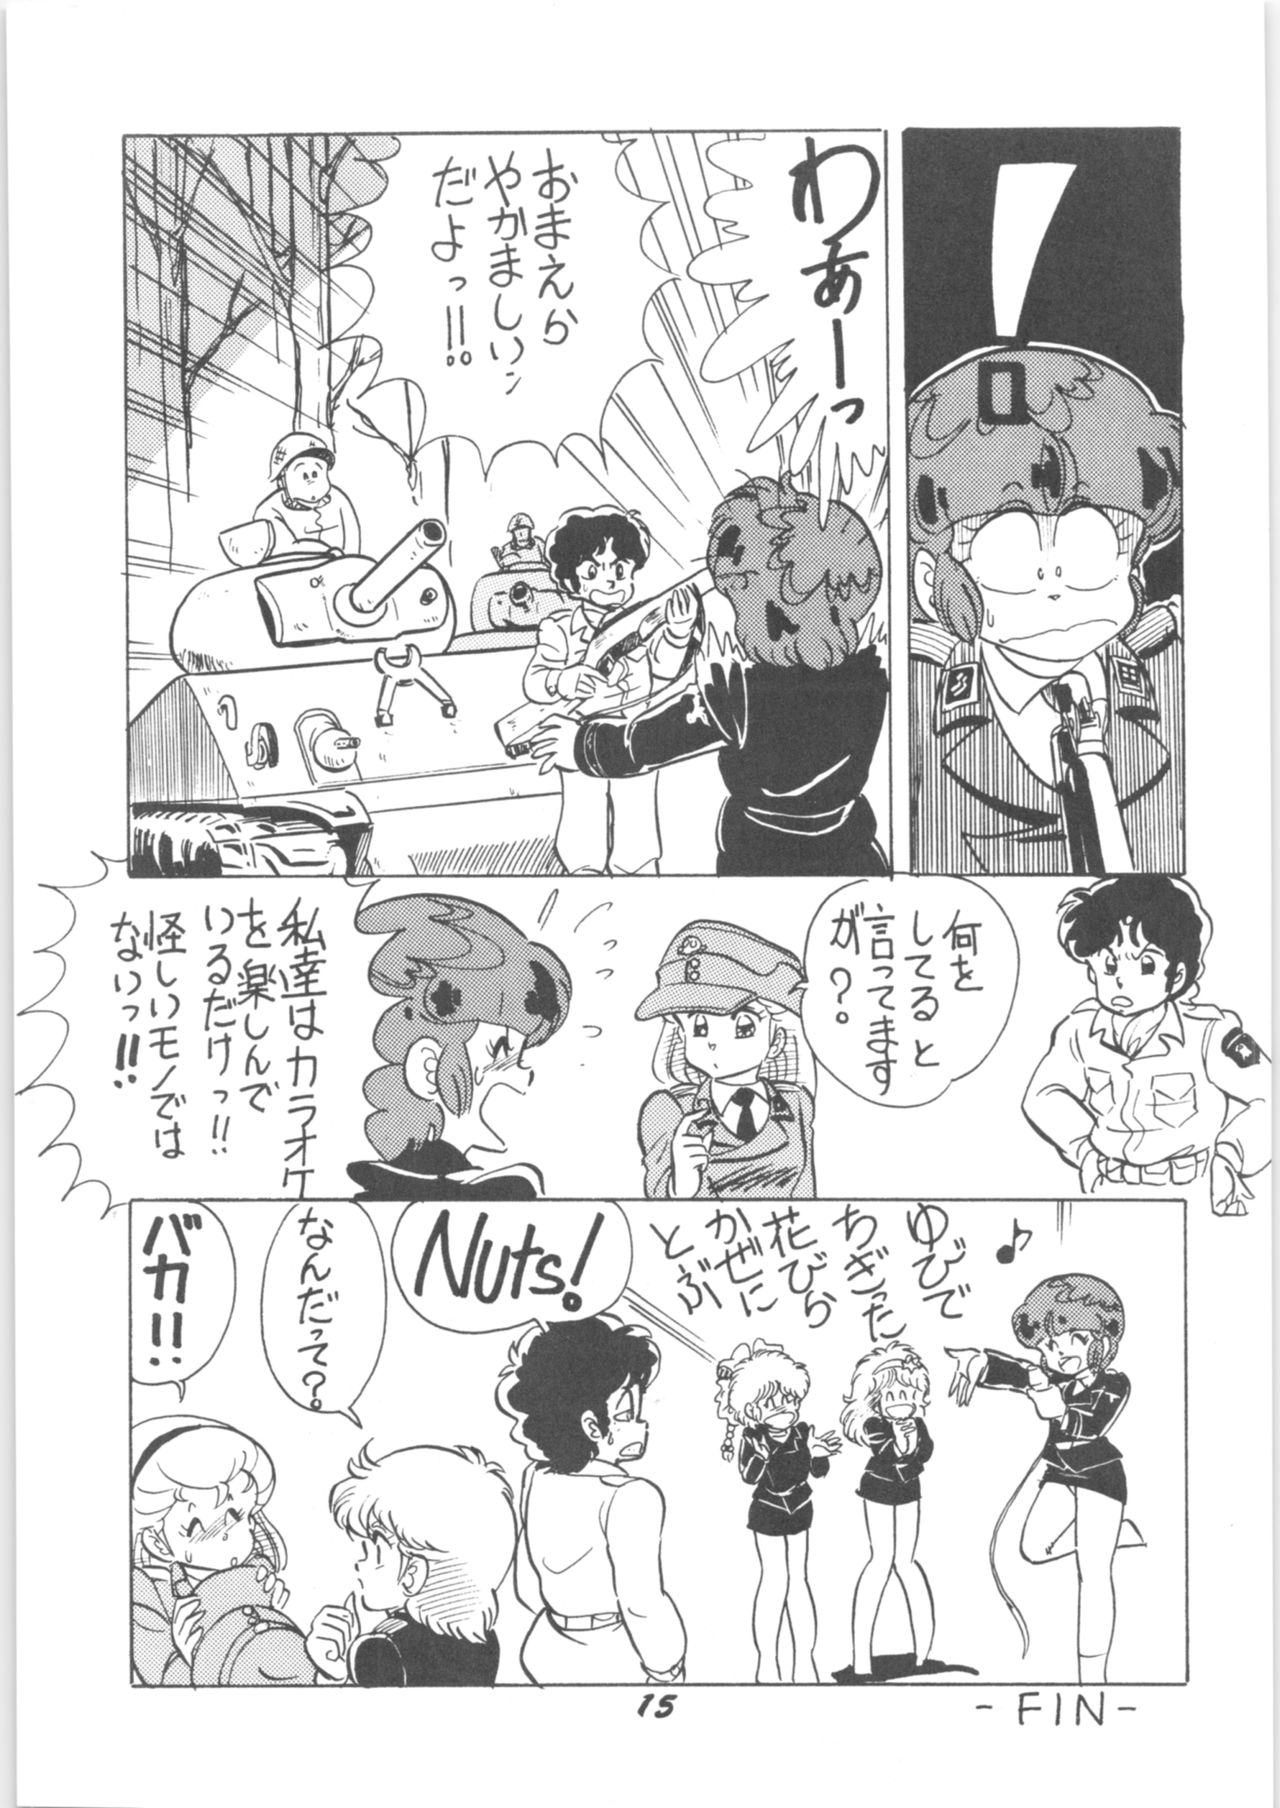 (C36) [Signal Group (Various)] Sieg Heil (Various) page 14 full